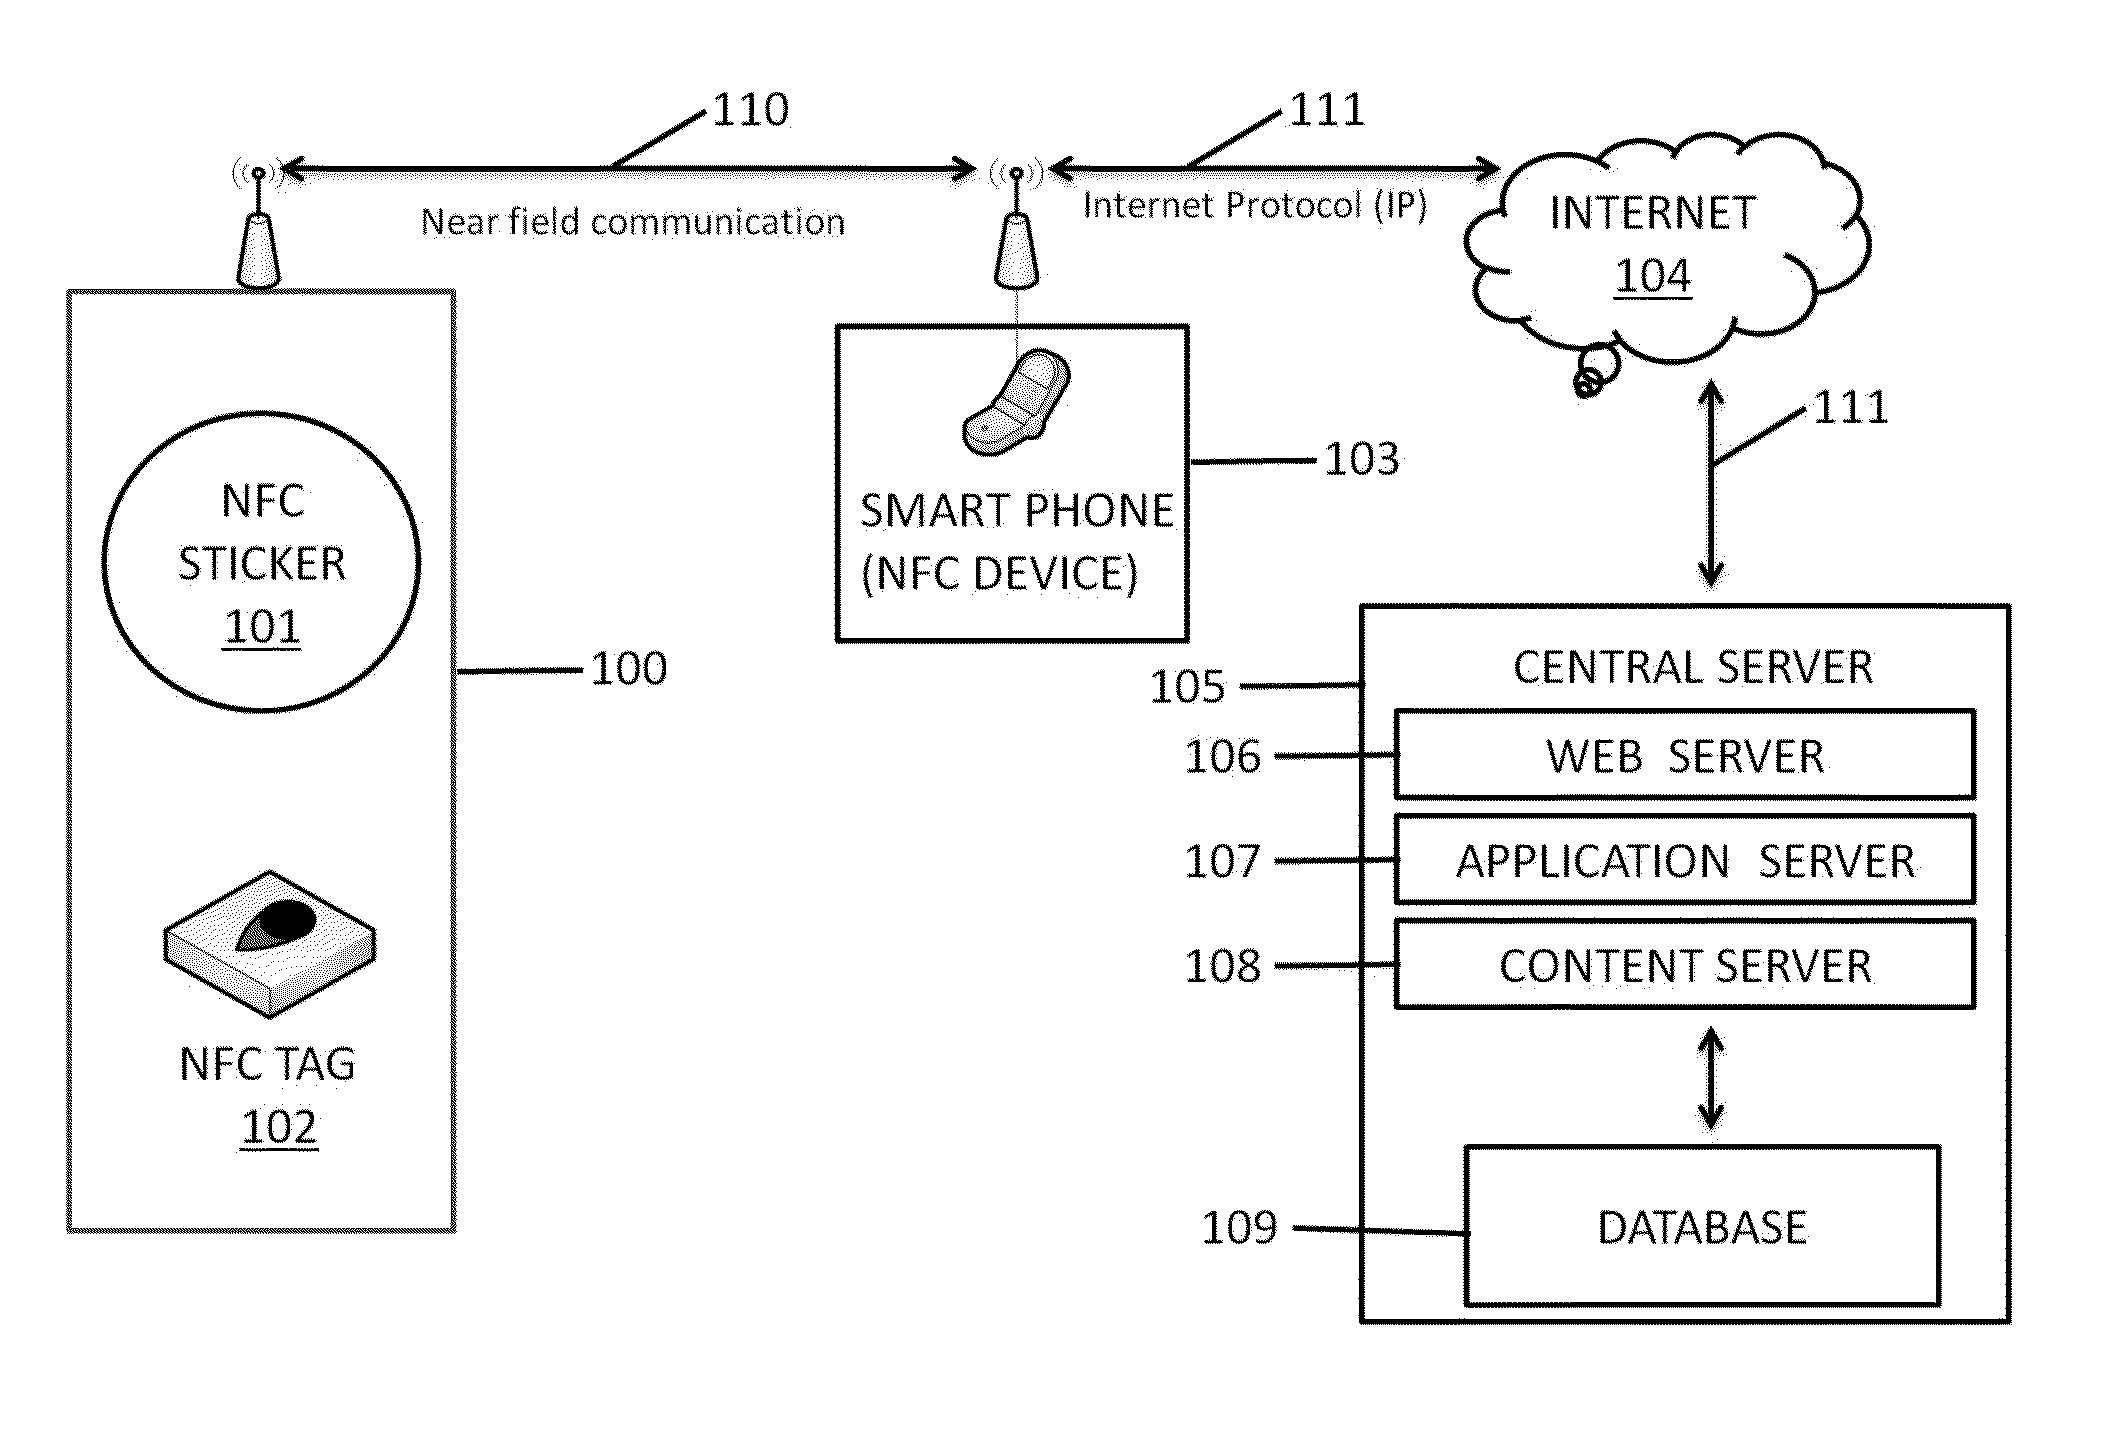 Methods and systems for communicating greeting and informational content using NFC devices